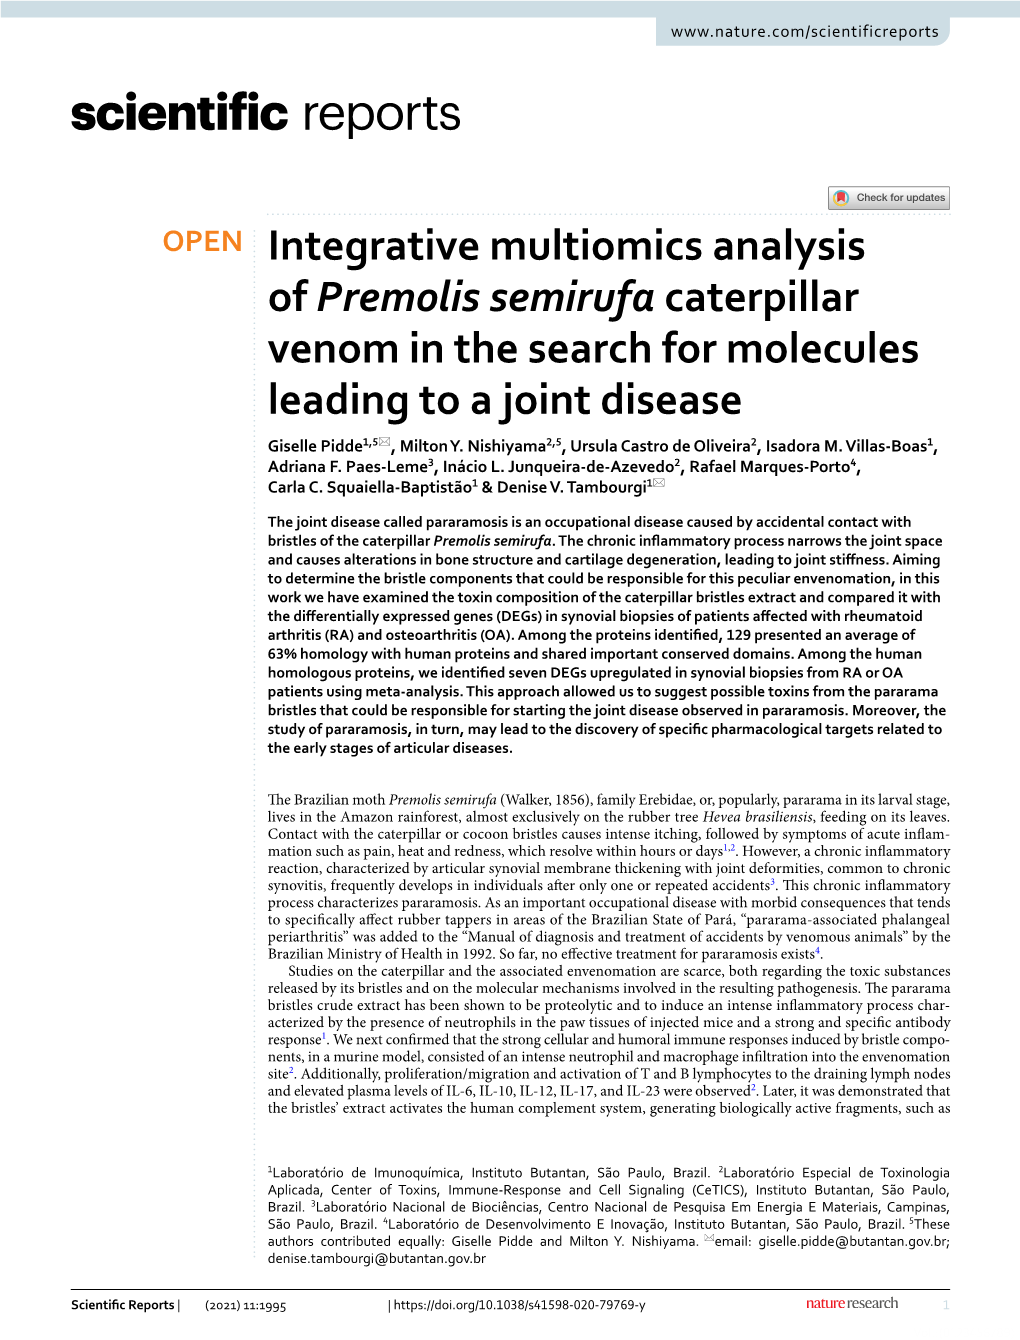 Integrative Multiomics Analysis of Premolis Semirufa Caterpillar Venom in the Search for Molecules Leading to a Joint Disease Giselle Pidde1,5*, Milton Y